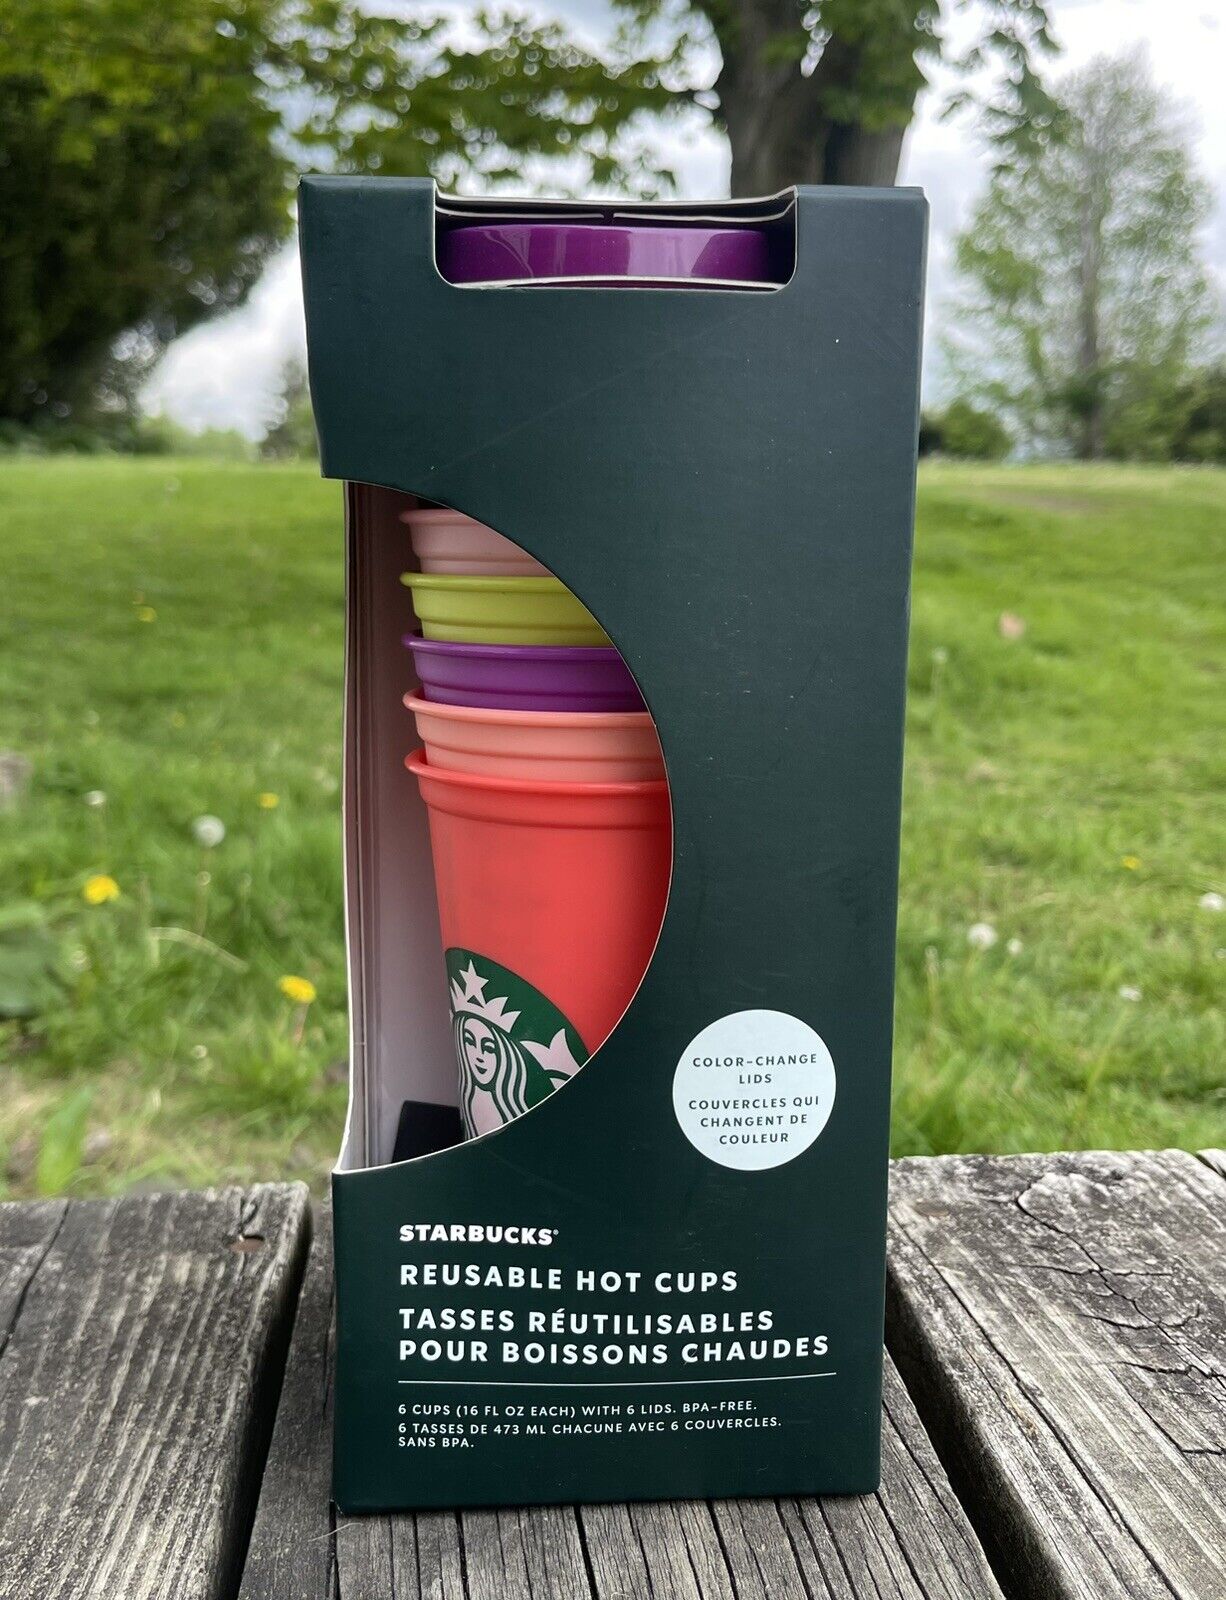 Brand New In Box Starbucks Reusable Hot Cups 6 Pack With Color Change Lids